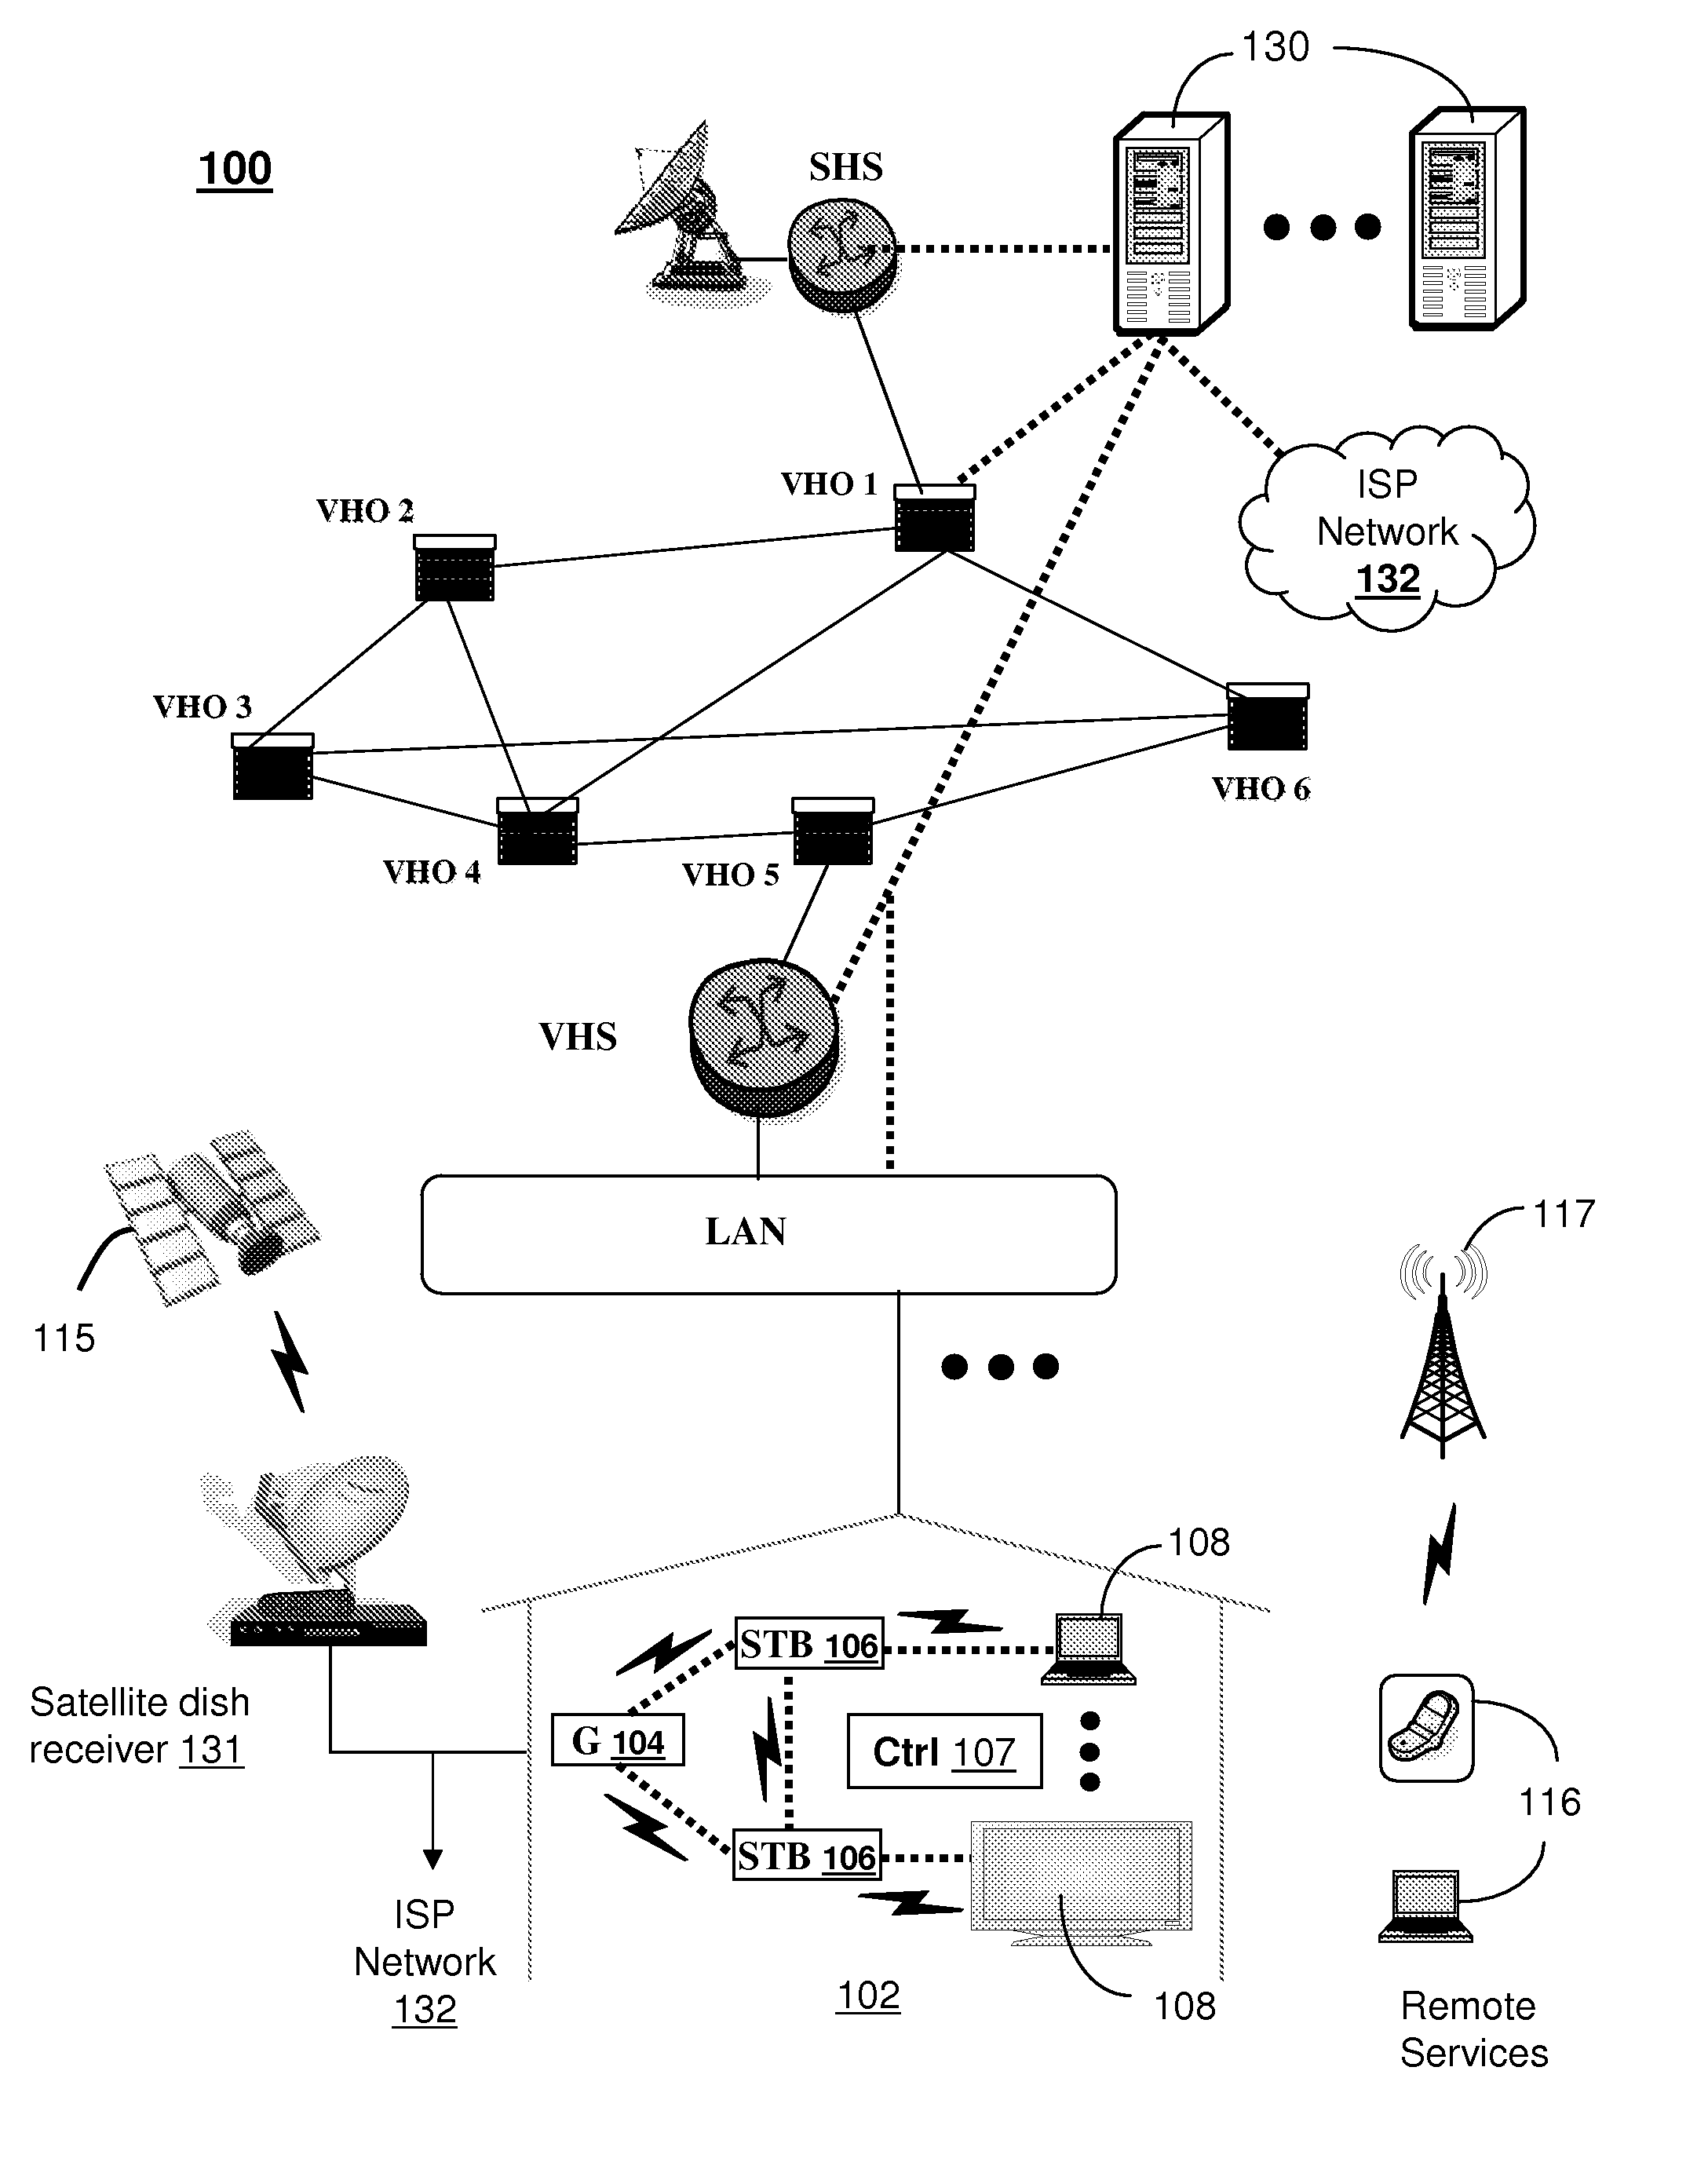 System for presenting status information associated with a media content processor